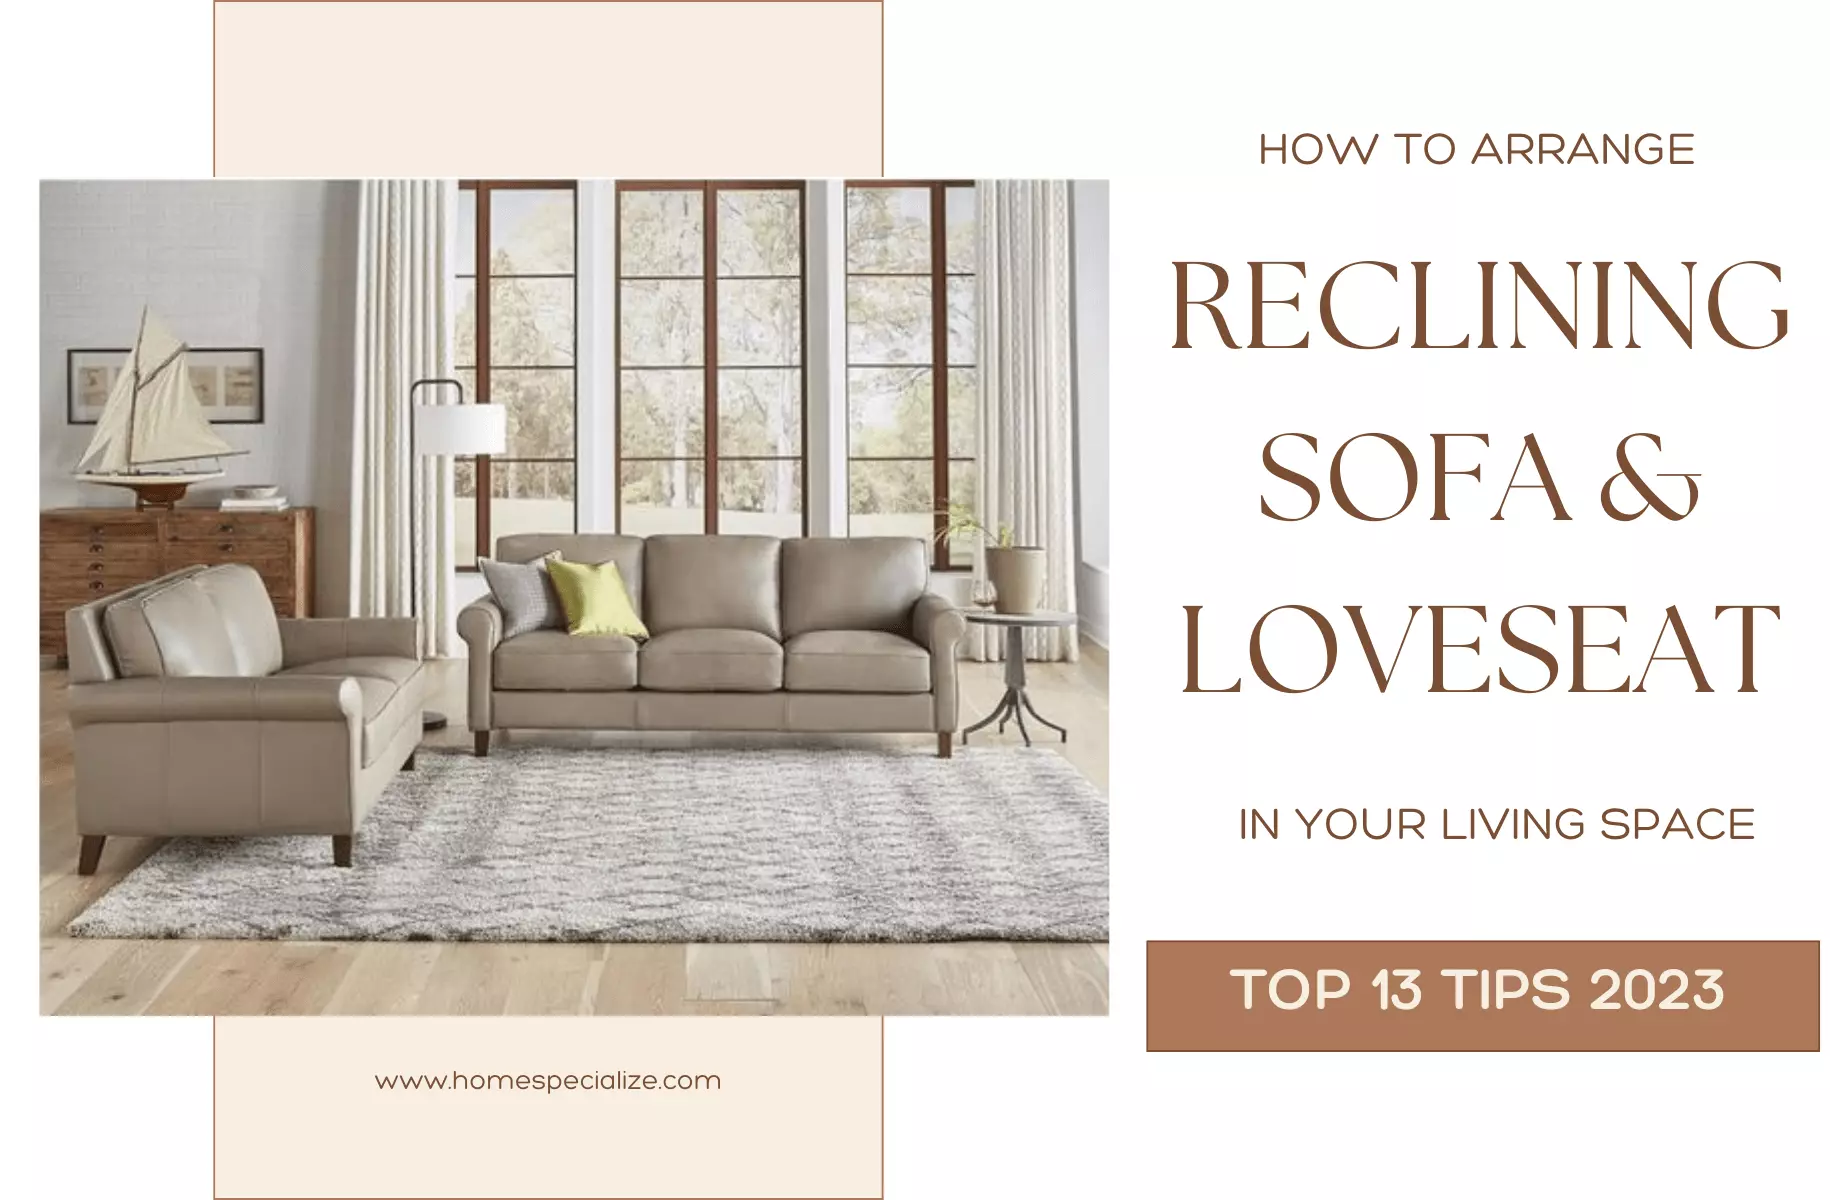 How to Arrange Reclining Sofa and Loveseat